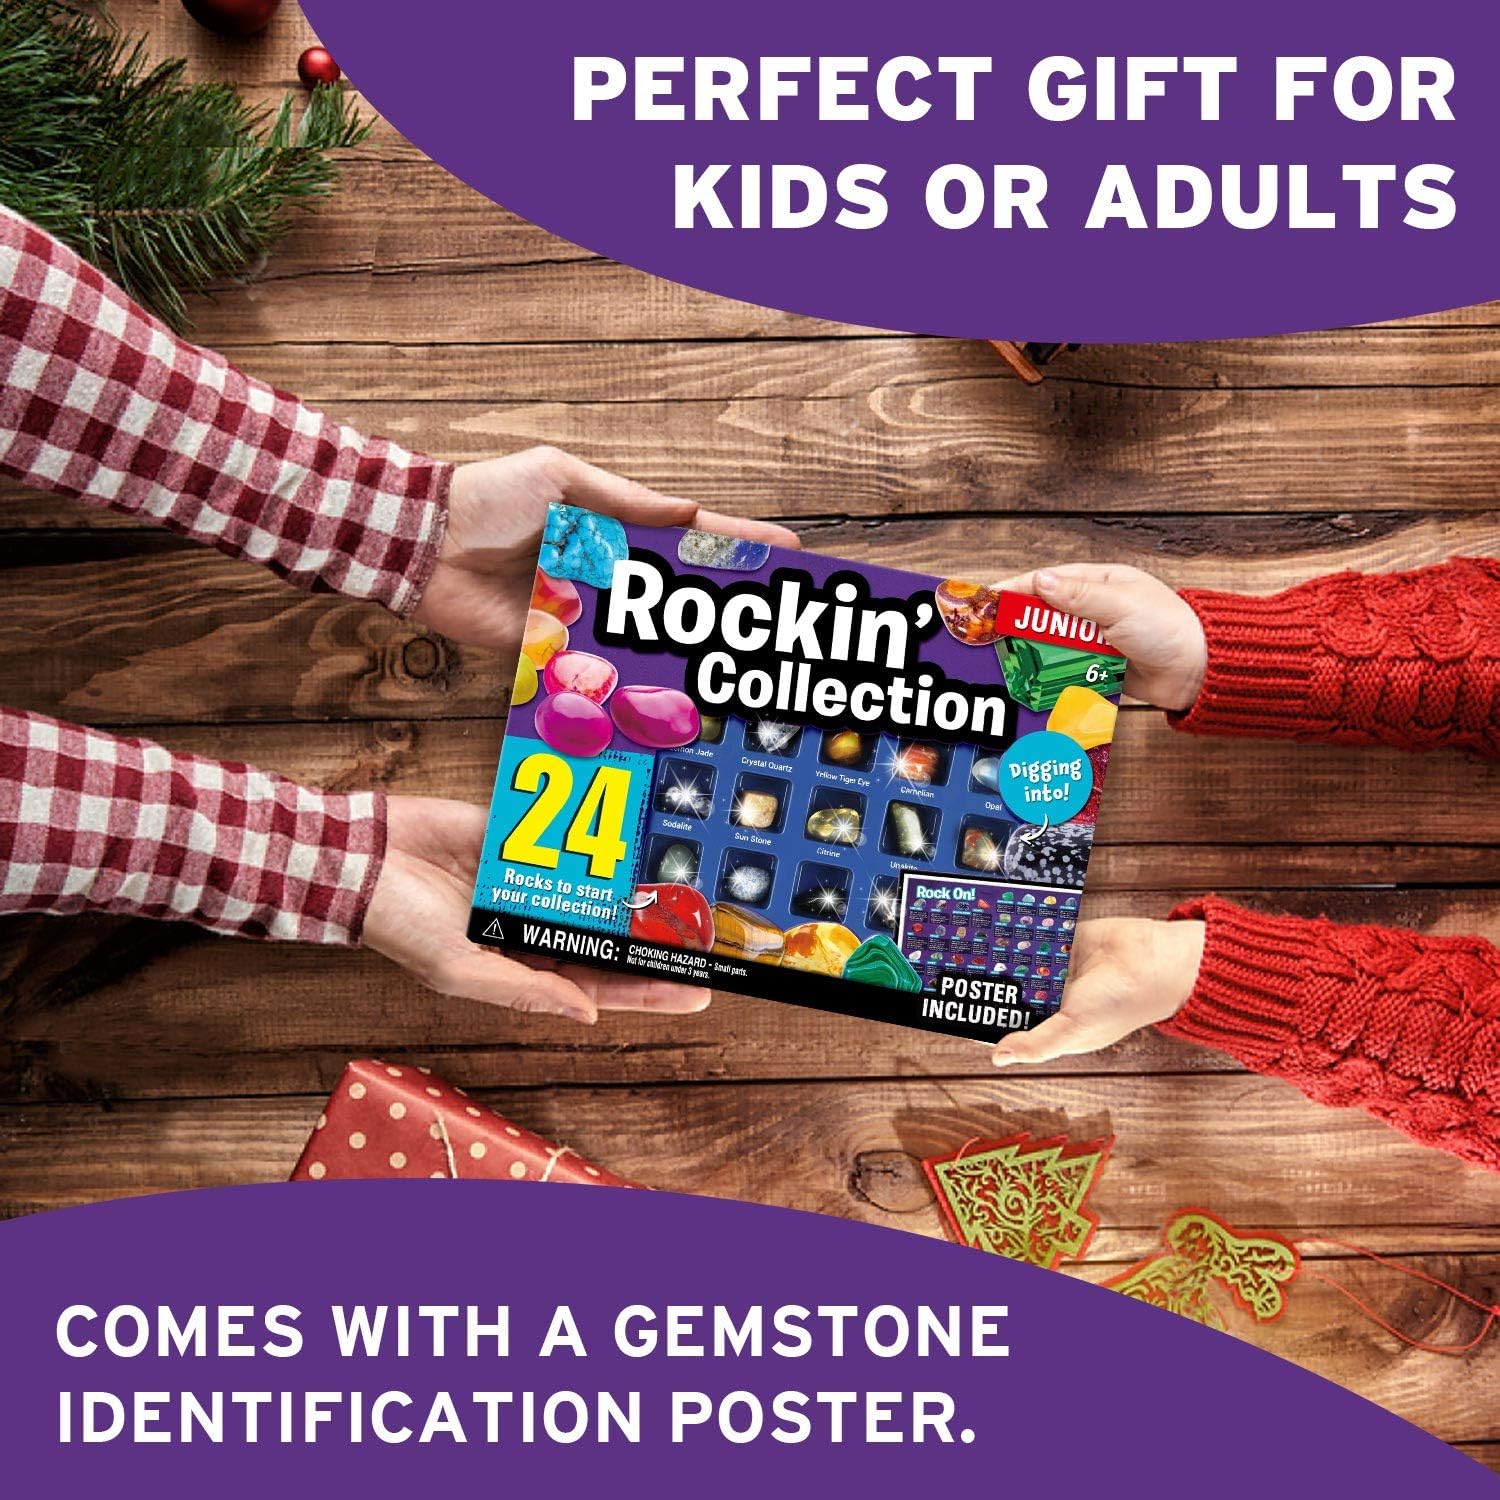 Eduman Byncceh Rock Collection Box for Kids - 24 Unique Gemstones- Educational Science Kit